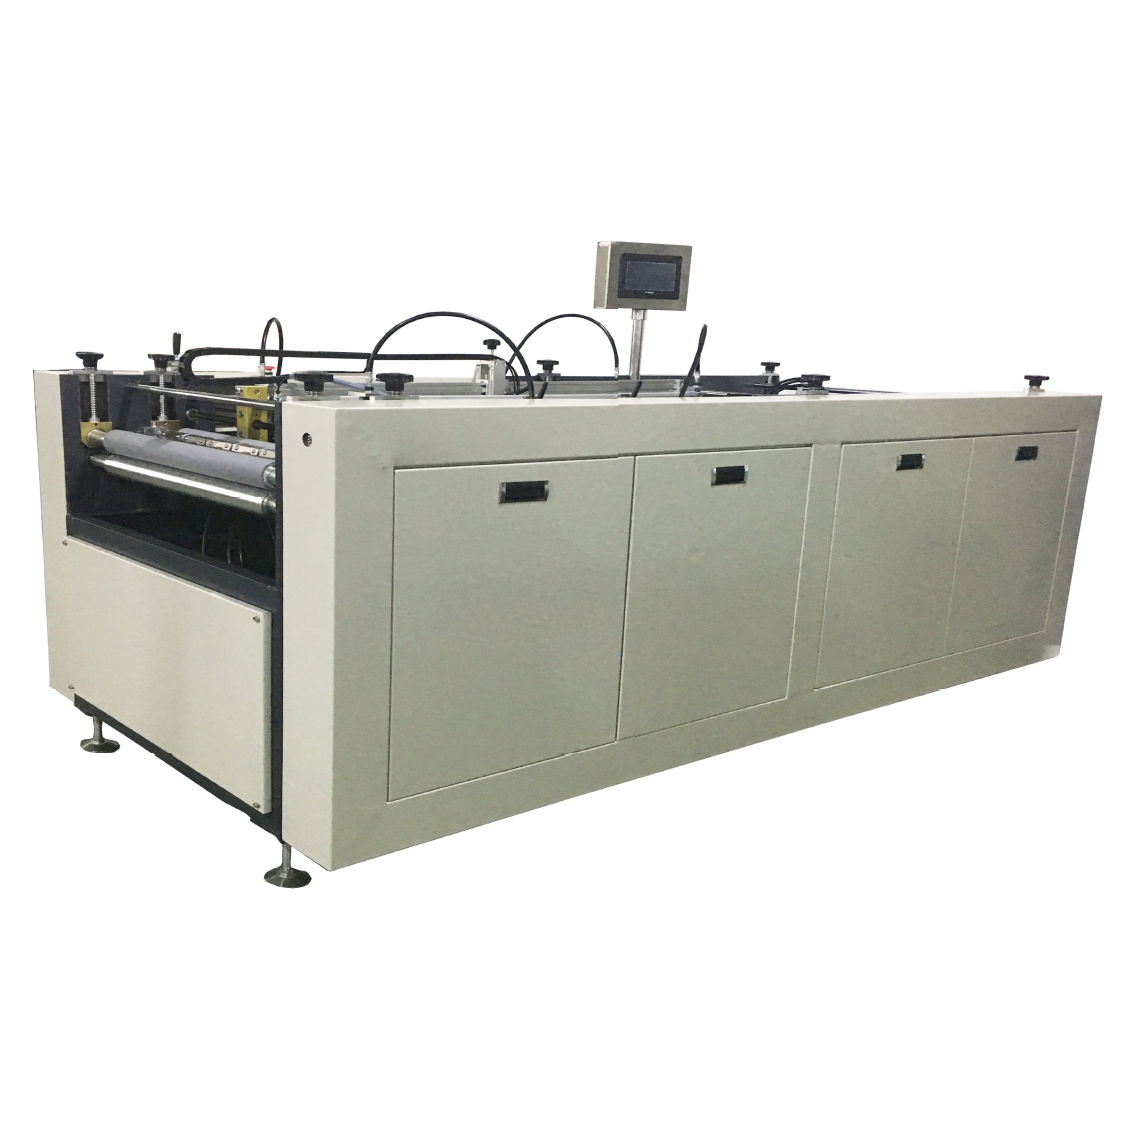 Foursided taping machine wrapping and coating equipment